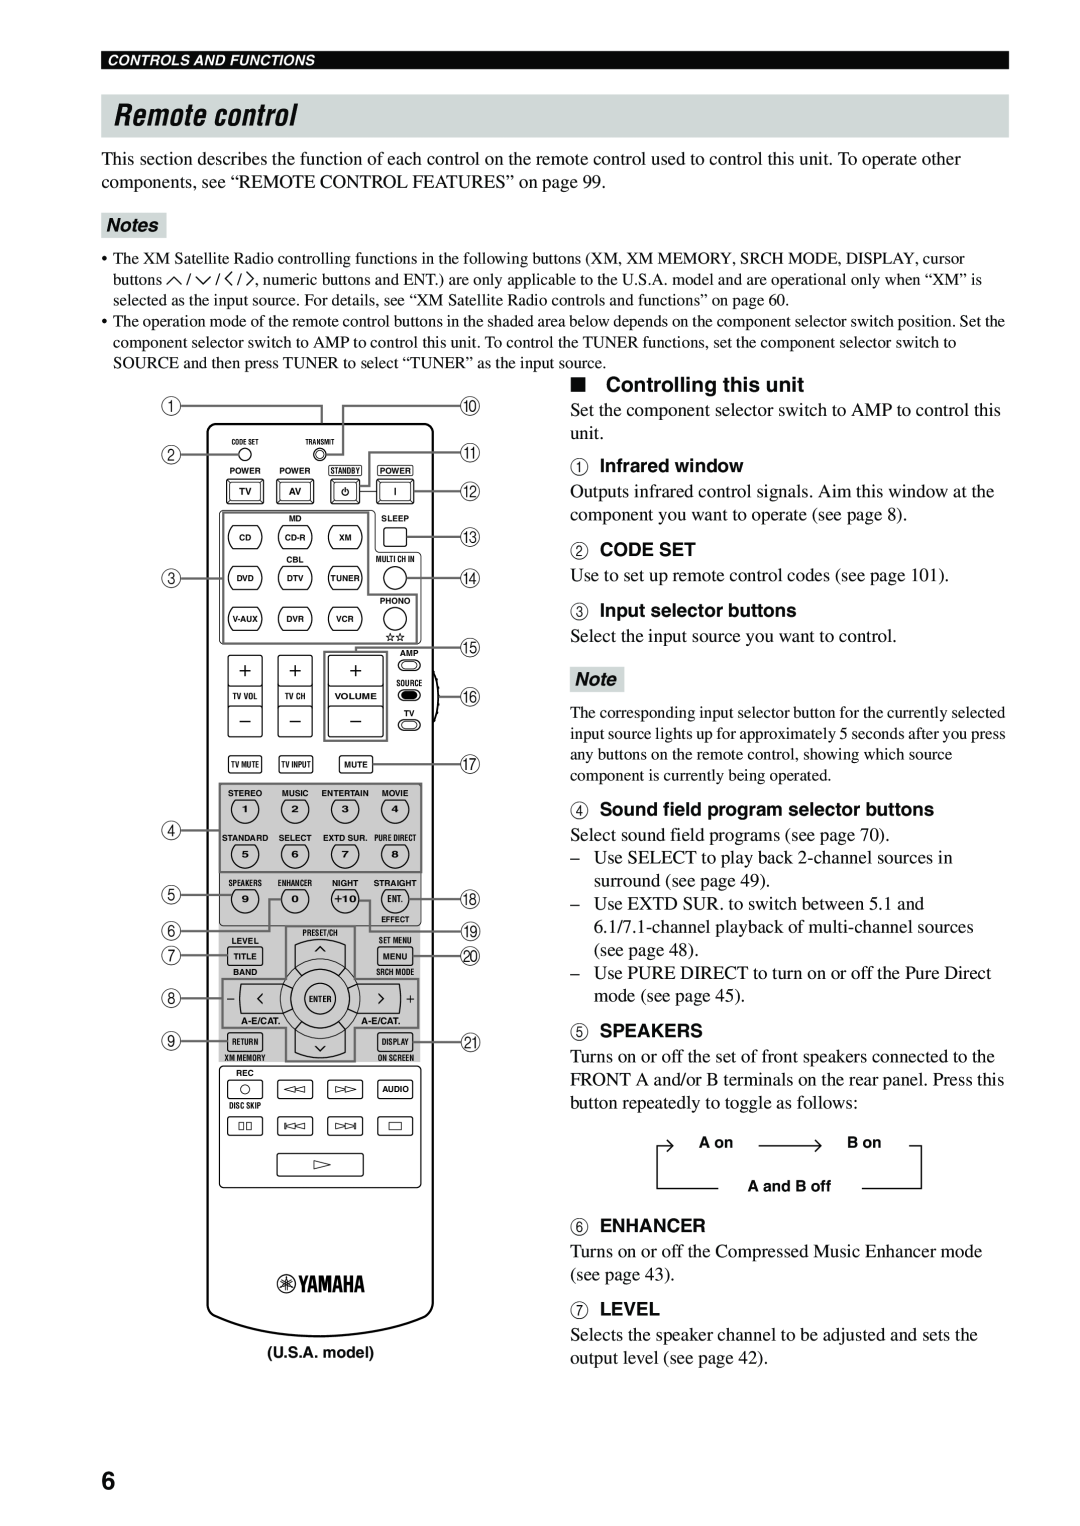 Yamaha HTR-5960 owner manual Remote control, Controlling this unit 